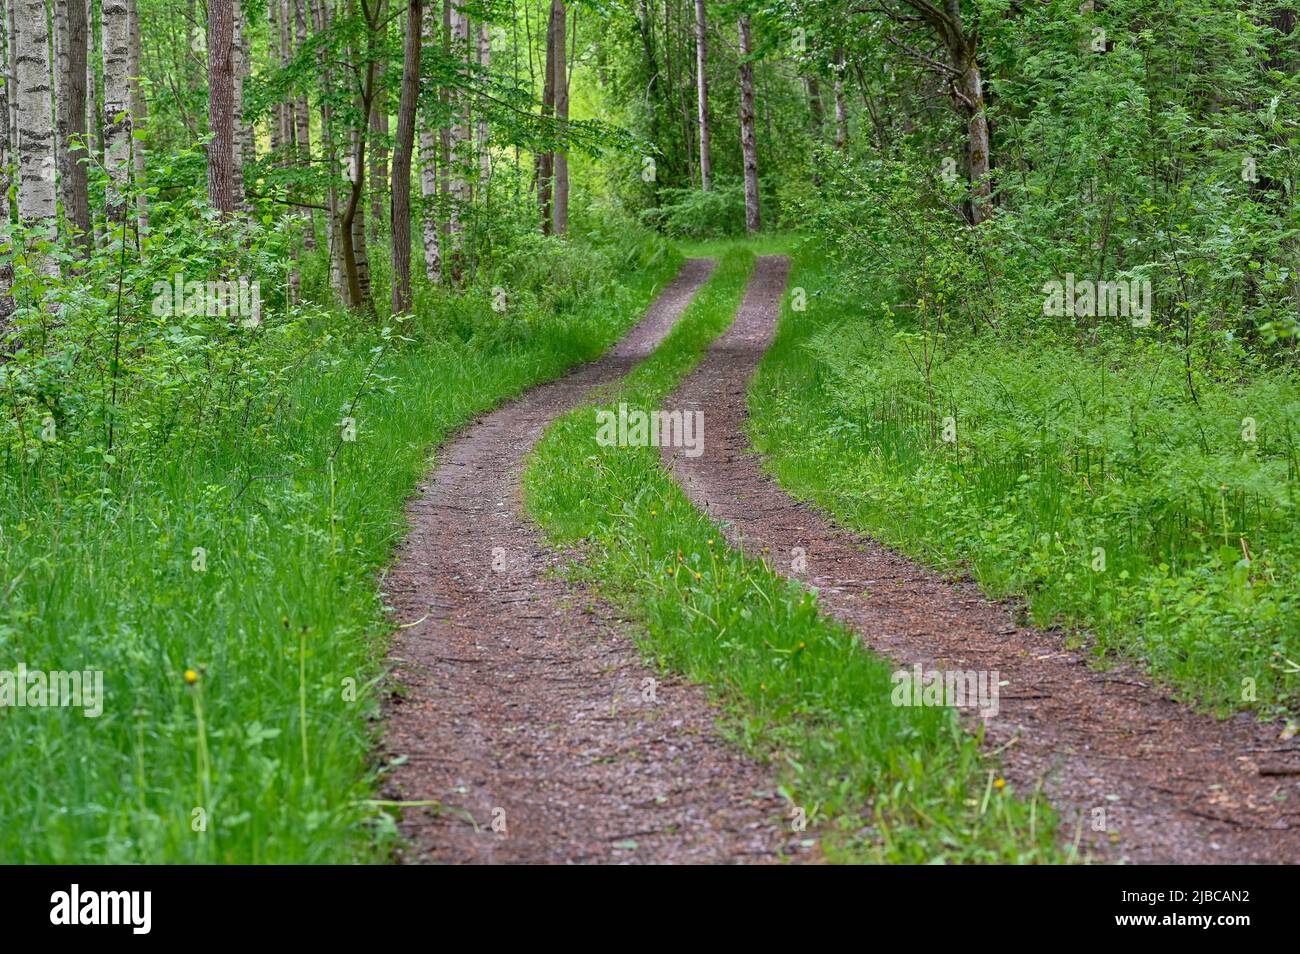 narrow road through green forest in springtime Stock Photo